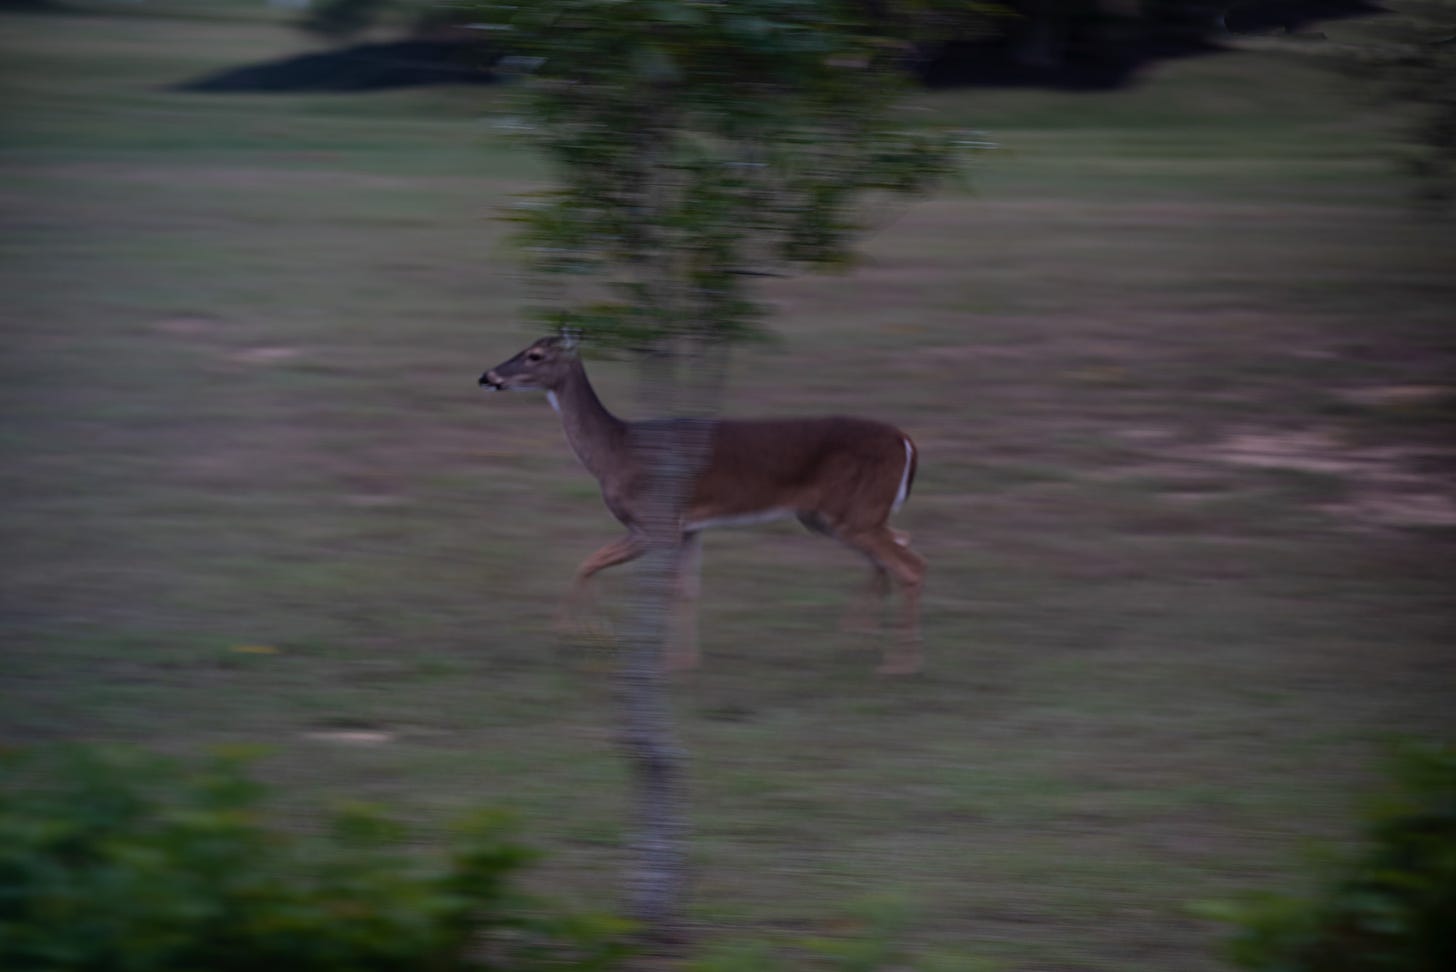 A whiteitailed female deer runs; the trees and background blurred as the camera stops the movement